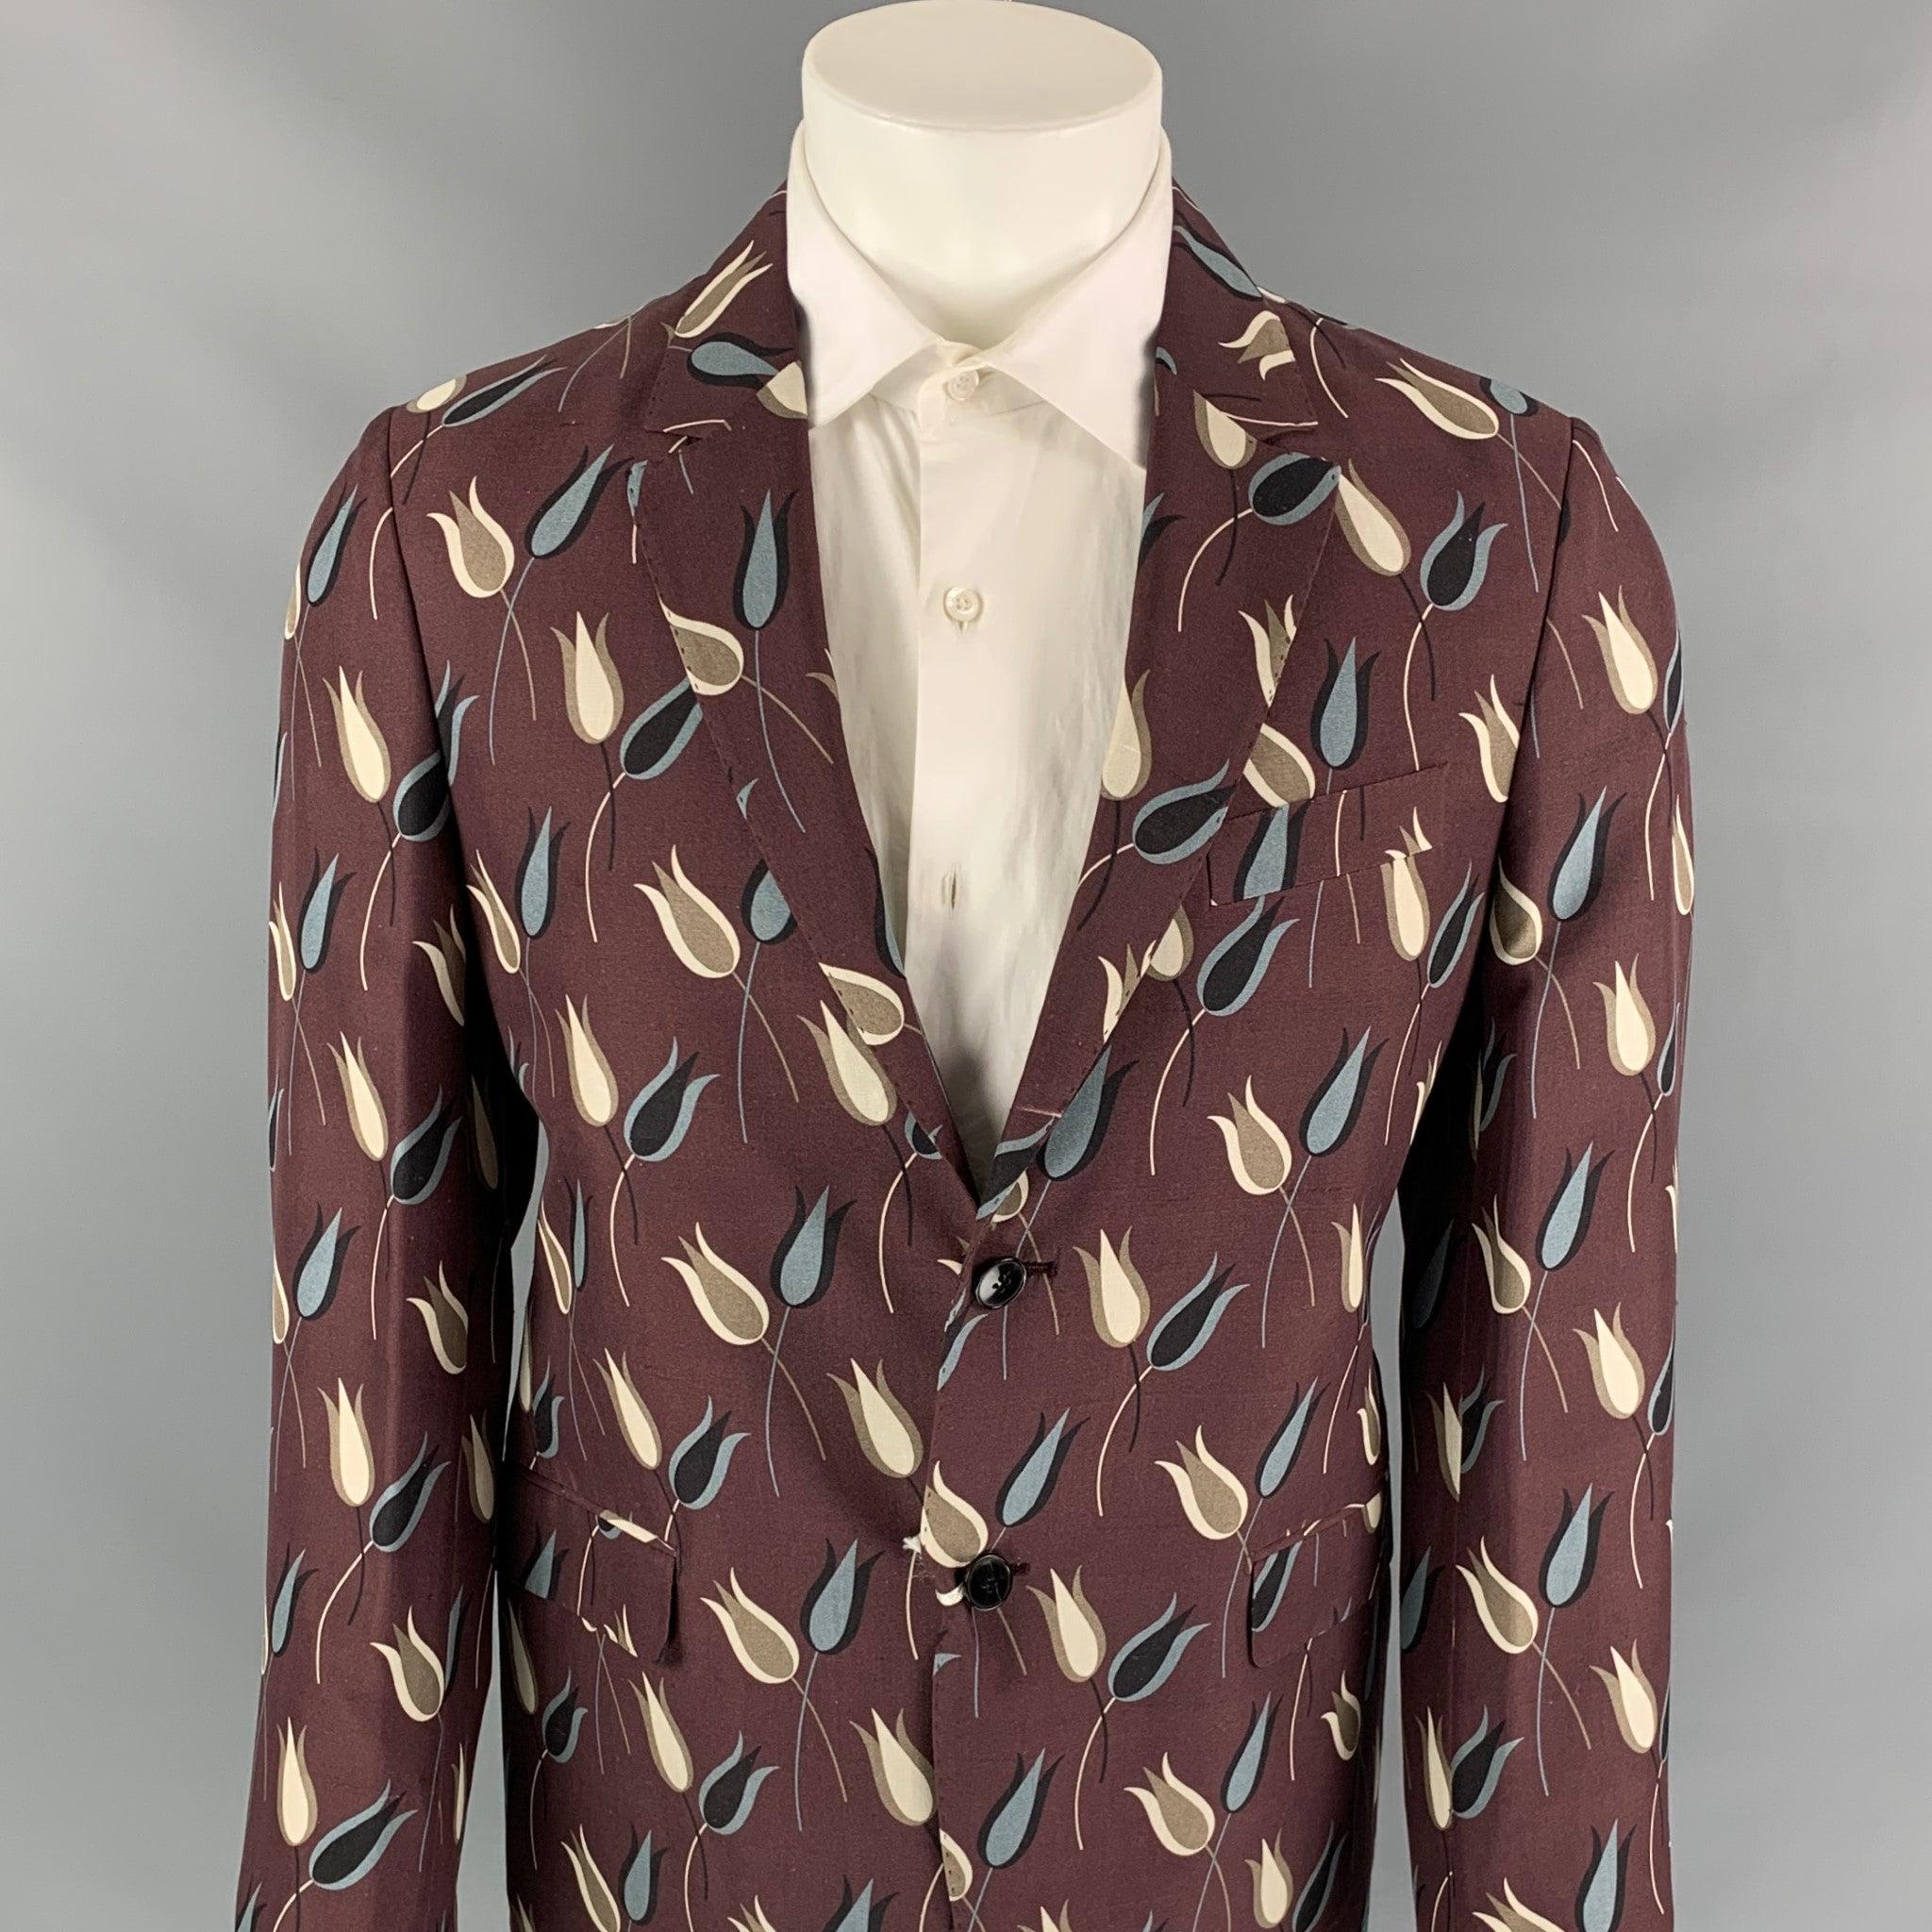 VALENTINO sport coat comes in a purple & grey floral silk featuring a notch lapel, flap pockets, and a two button closure. Made in Italy.New With Tags.
 

Marked:   48 

Measurements: 
 
Shoulder: 16.5 inches  Chest: 38 inches  Sleeve: 26.5 inches 